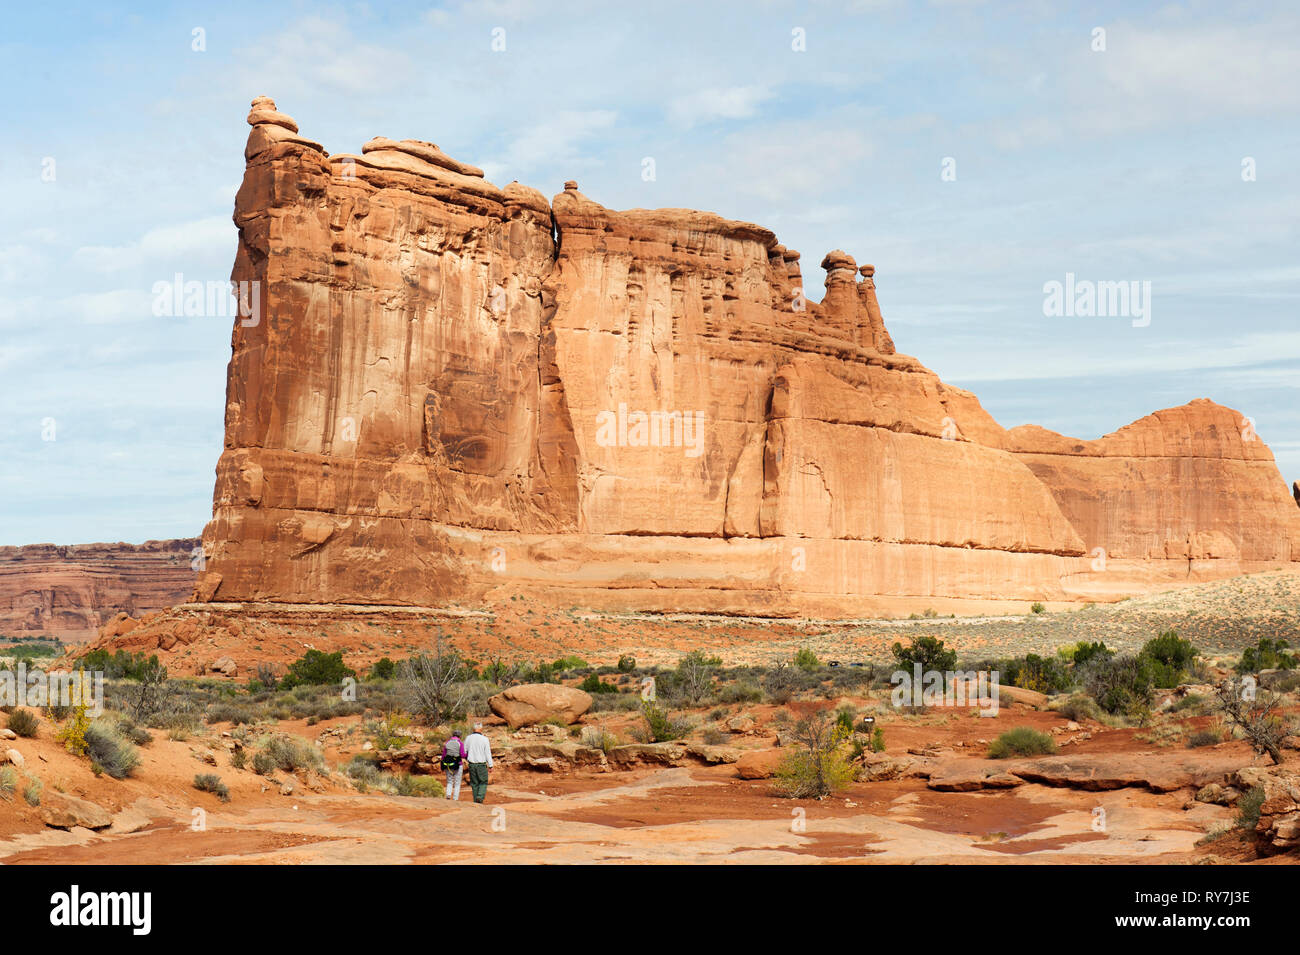 Two hikers approaching a gigantic sandstone formation known as the Tower of Babel on Park Avenue trail in Arches National Park, Utah, USA. Stock Photo